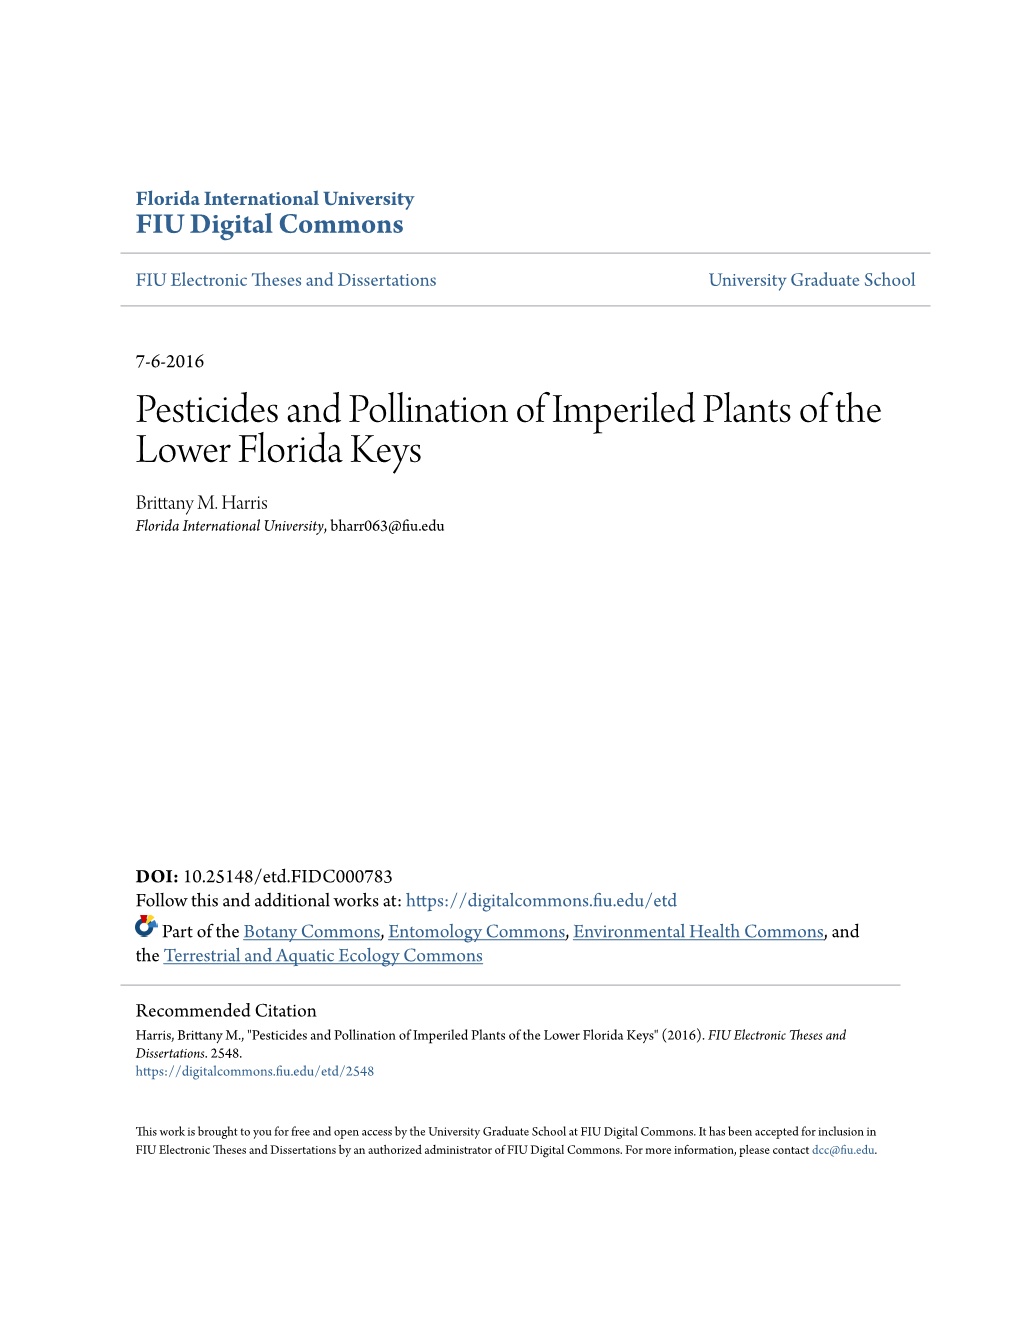 Pesticides and Pollination of Imperiled Plants of the Lower Florida Keys Brittany M